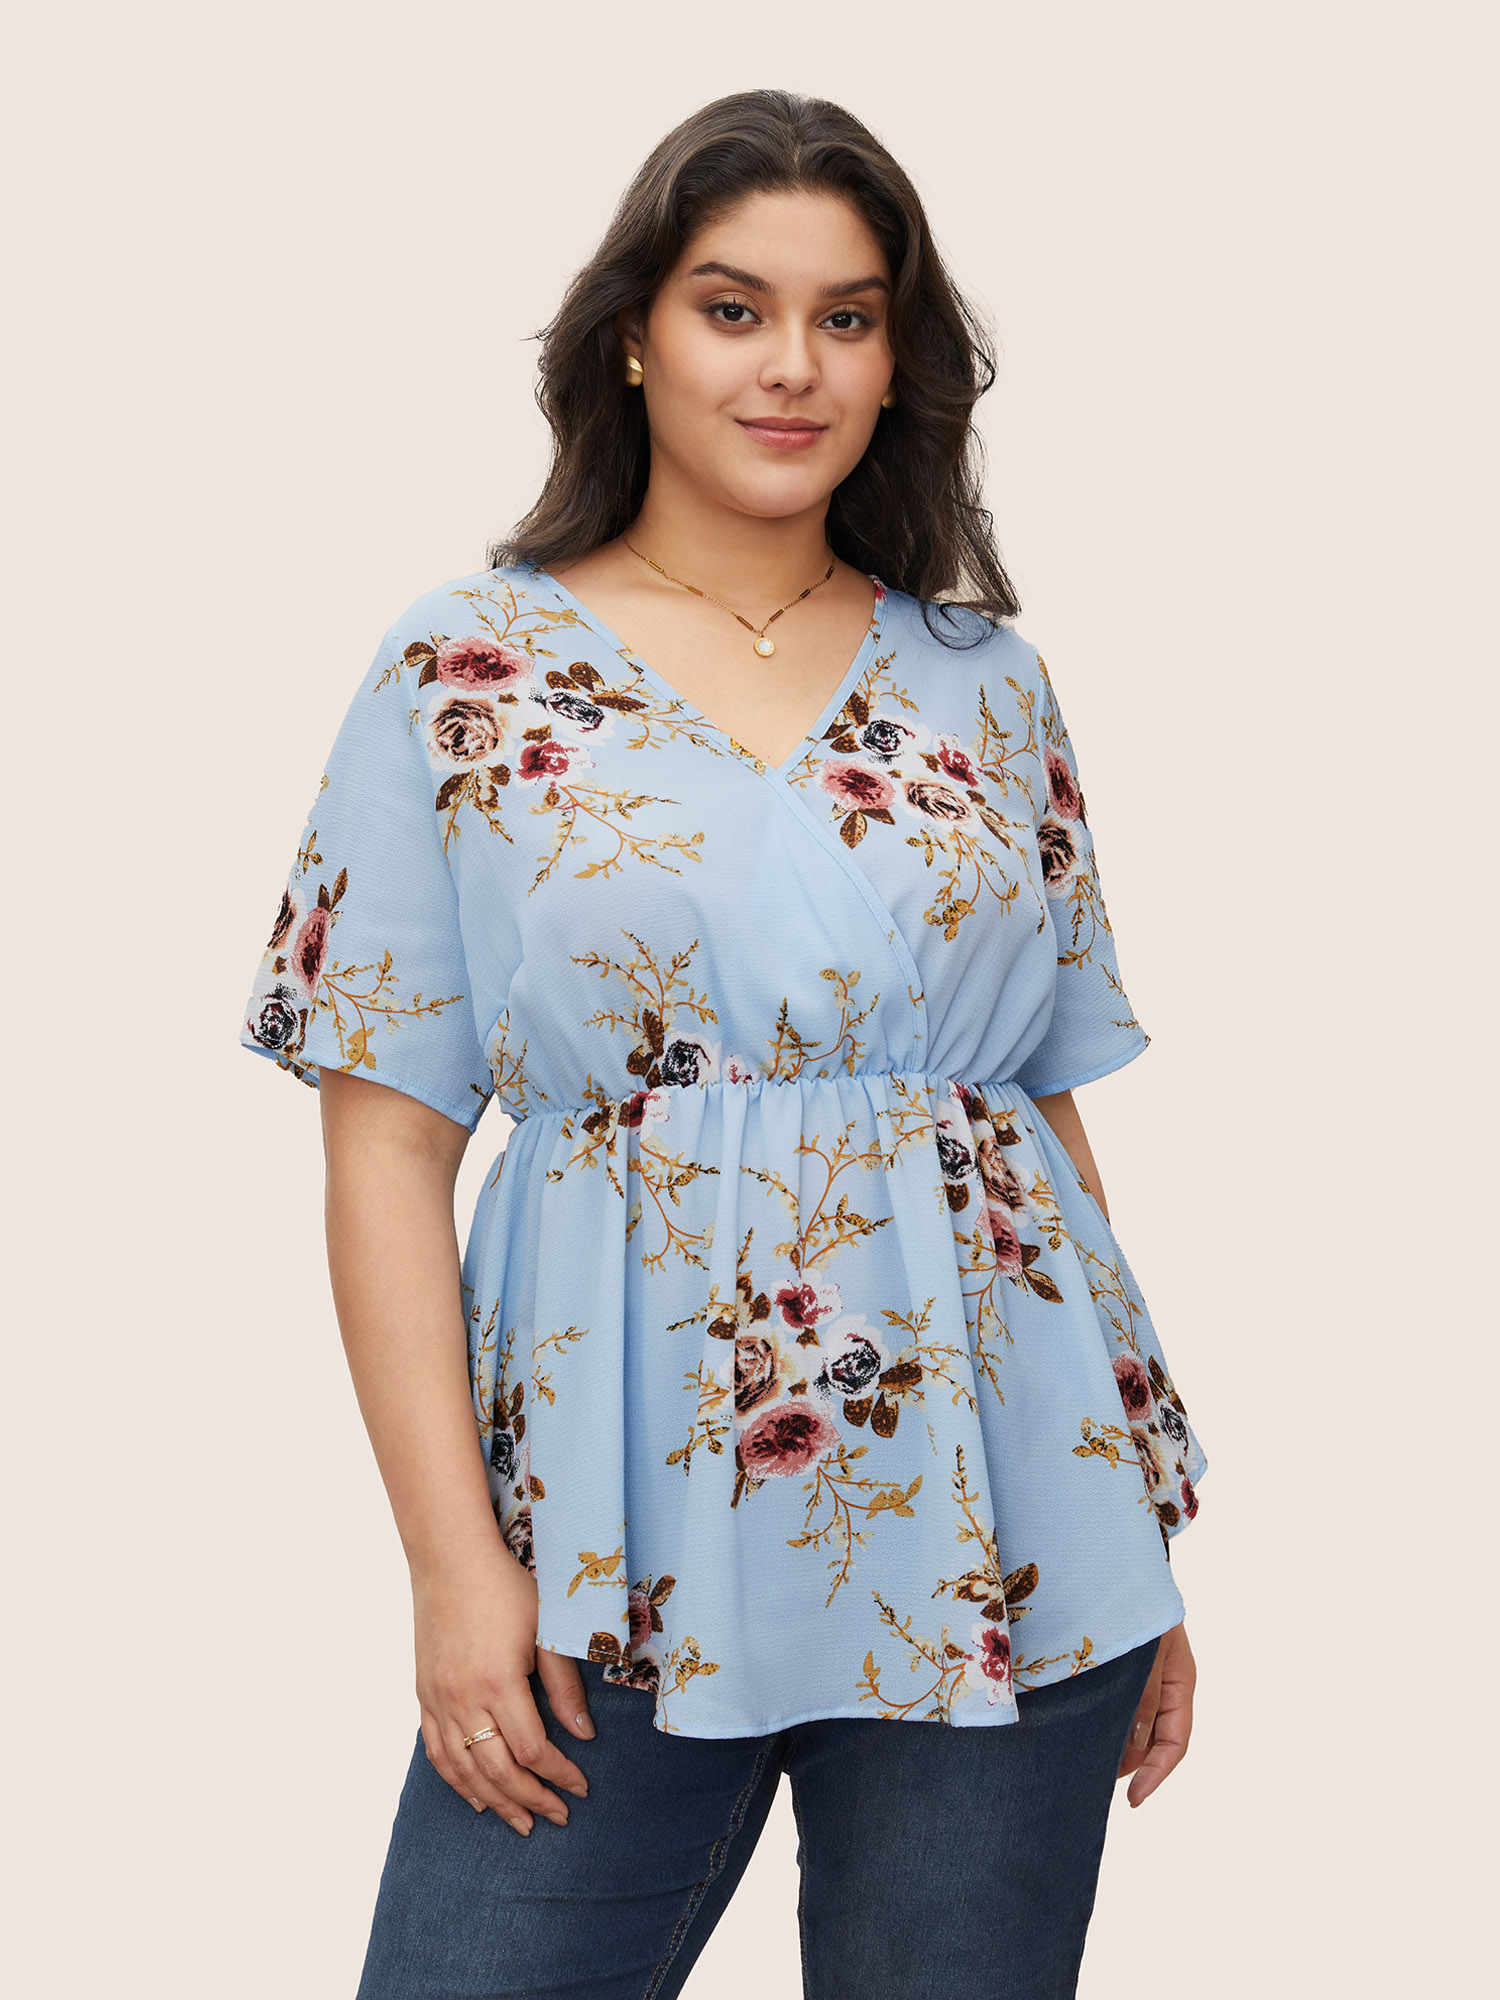 

Floral Wrap Smocked Plus Size Women Casual Blouses Dailywear Ruffle Sleeve Short Sleeve V Neck Elegance Blouses BloomChic, Cerulean